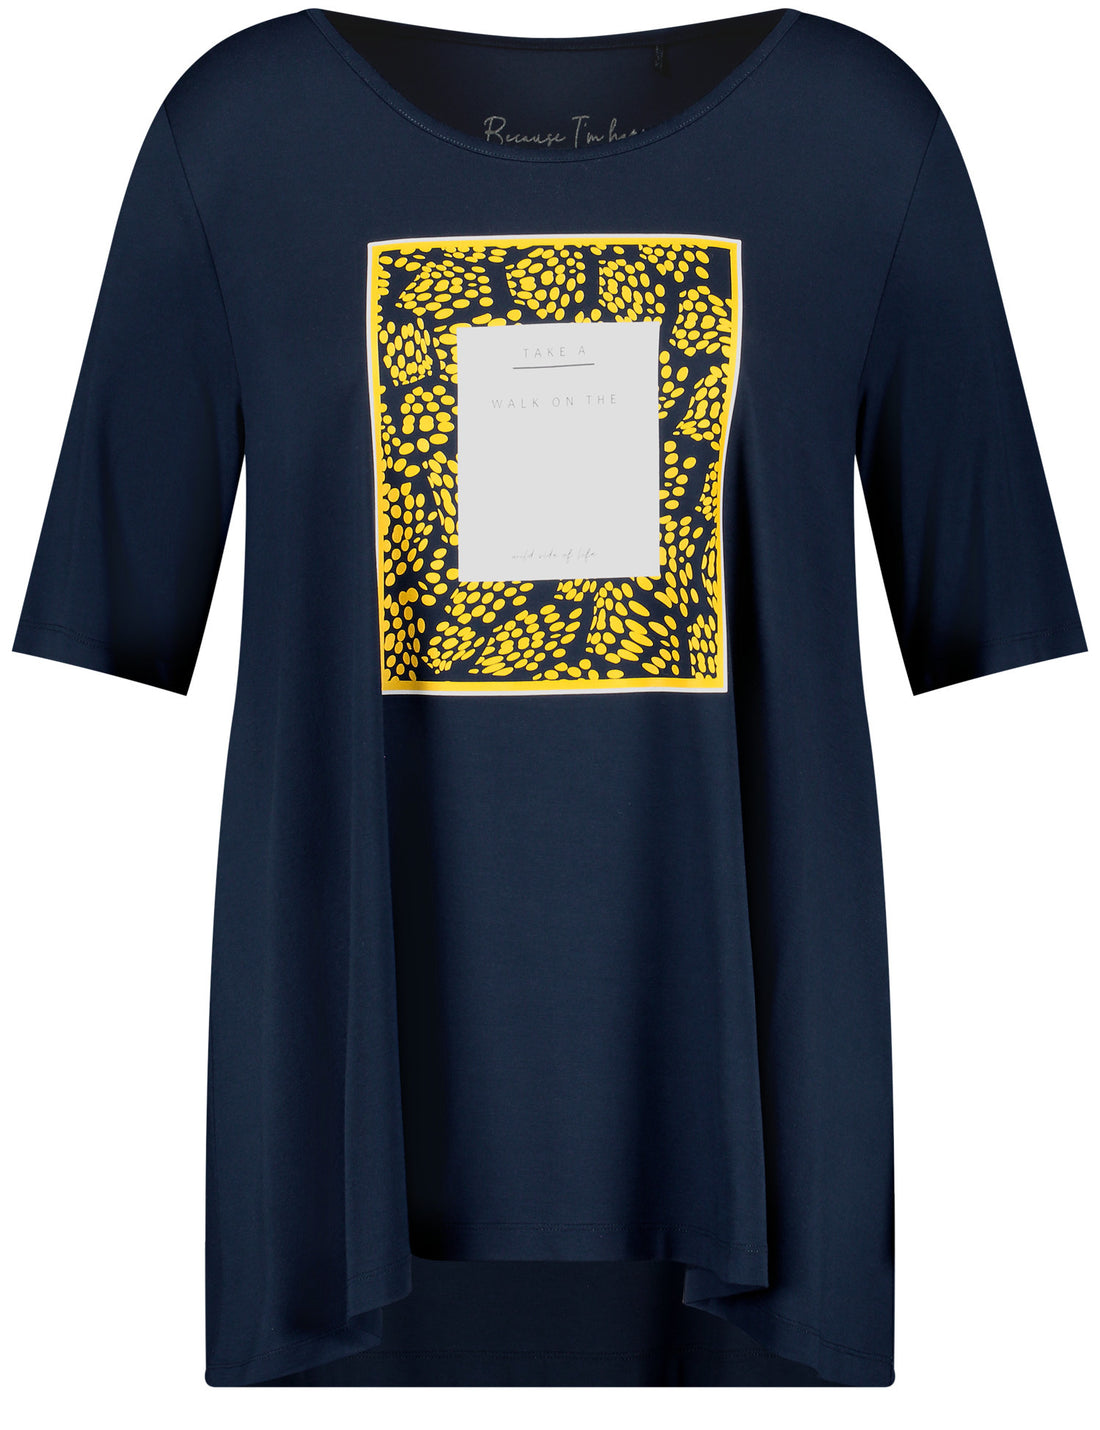 Flared Top With Mid-Length Sleeves And A Front Print